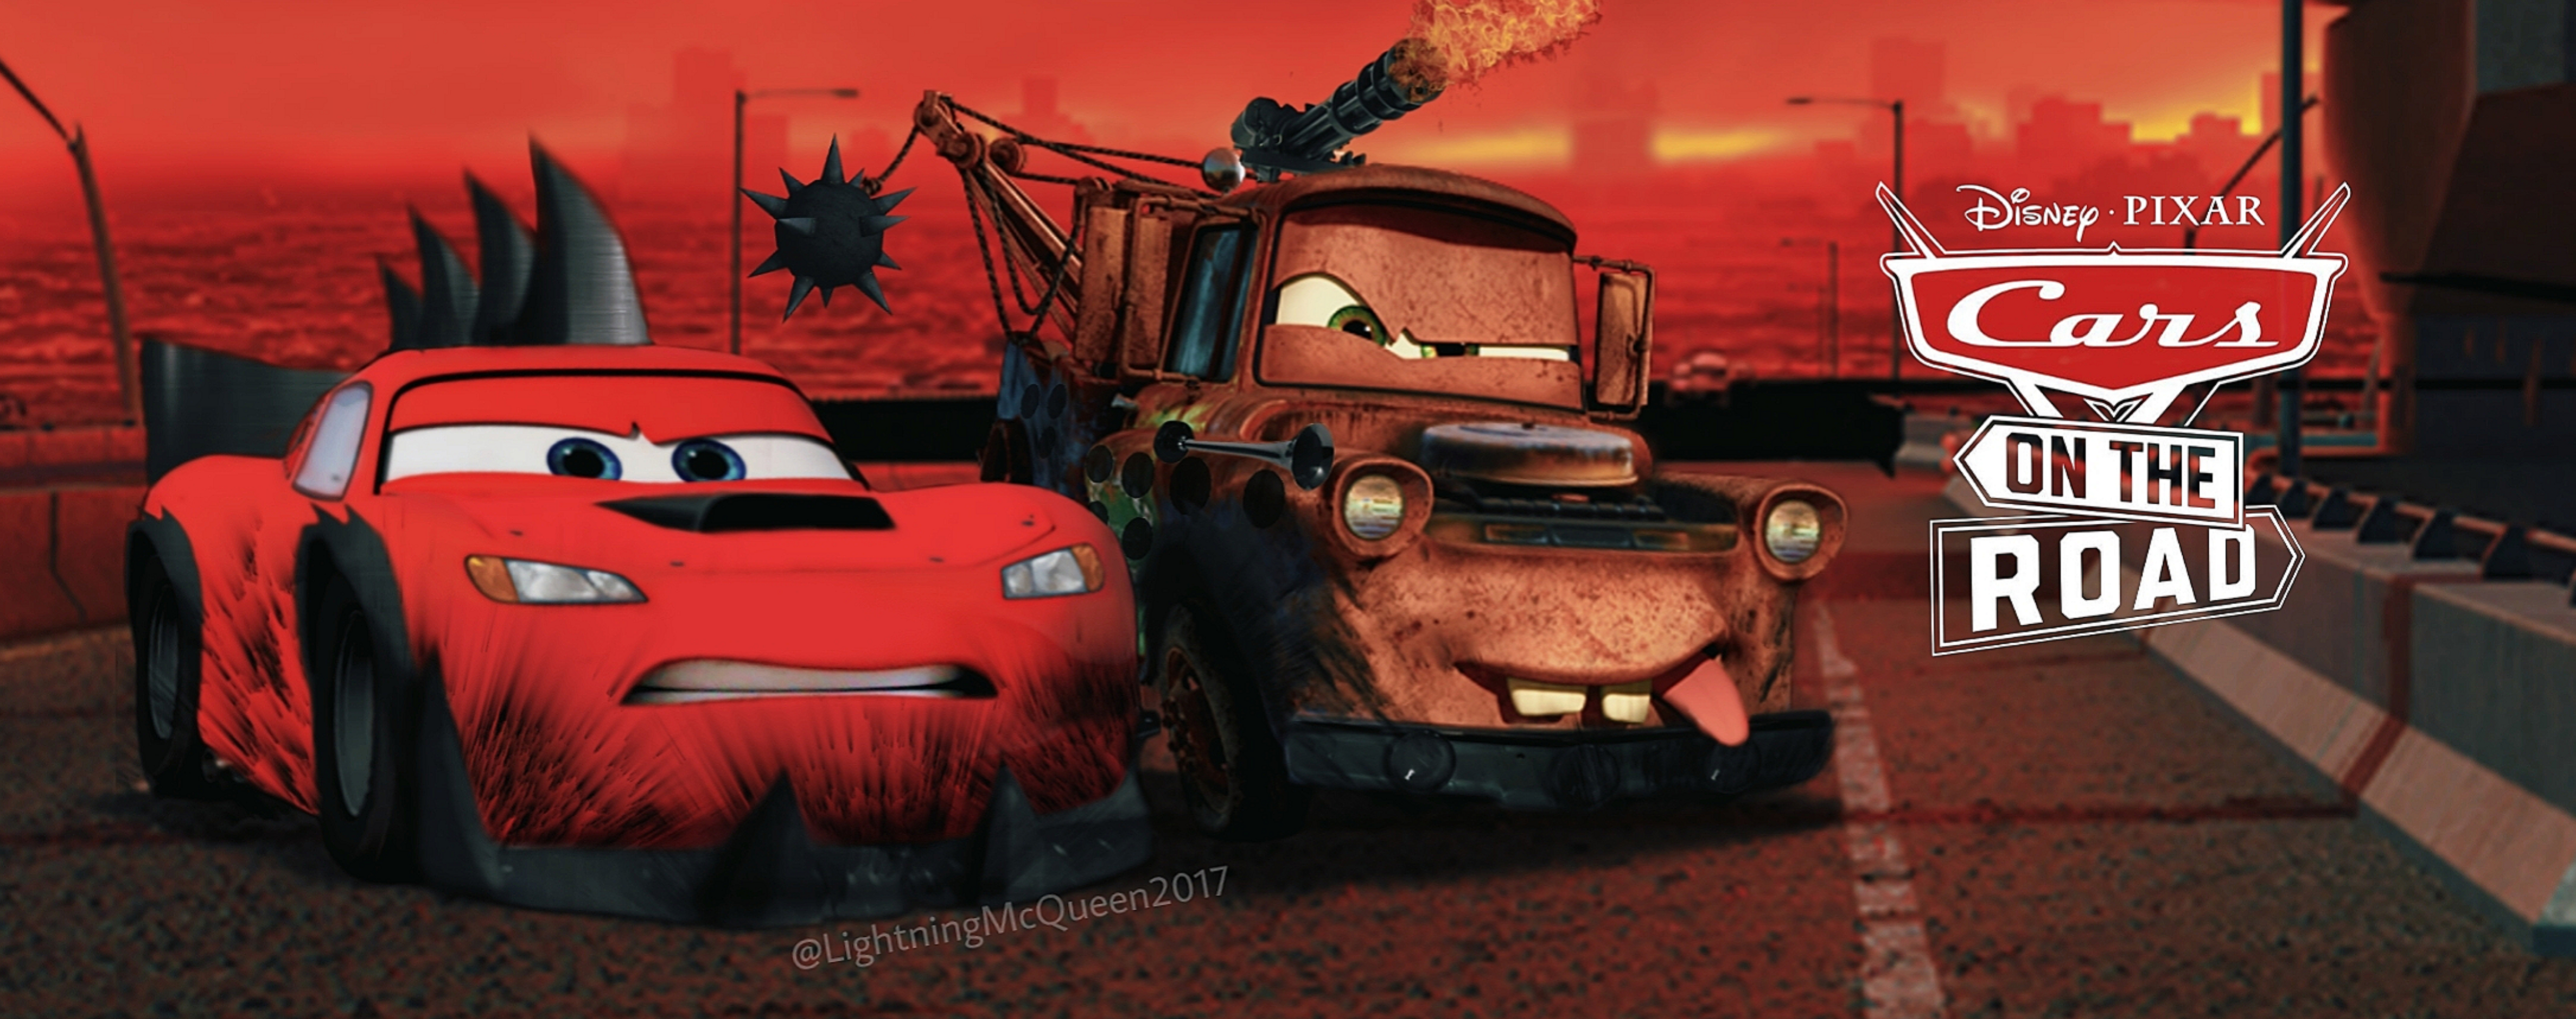 Cars On The Road (Disney Plus Series) Road Warrior by